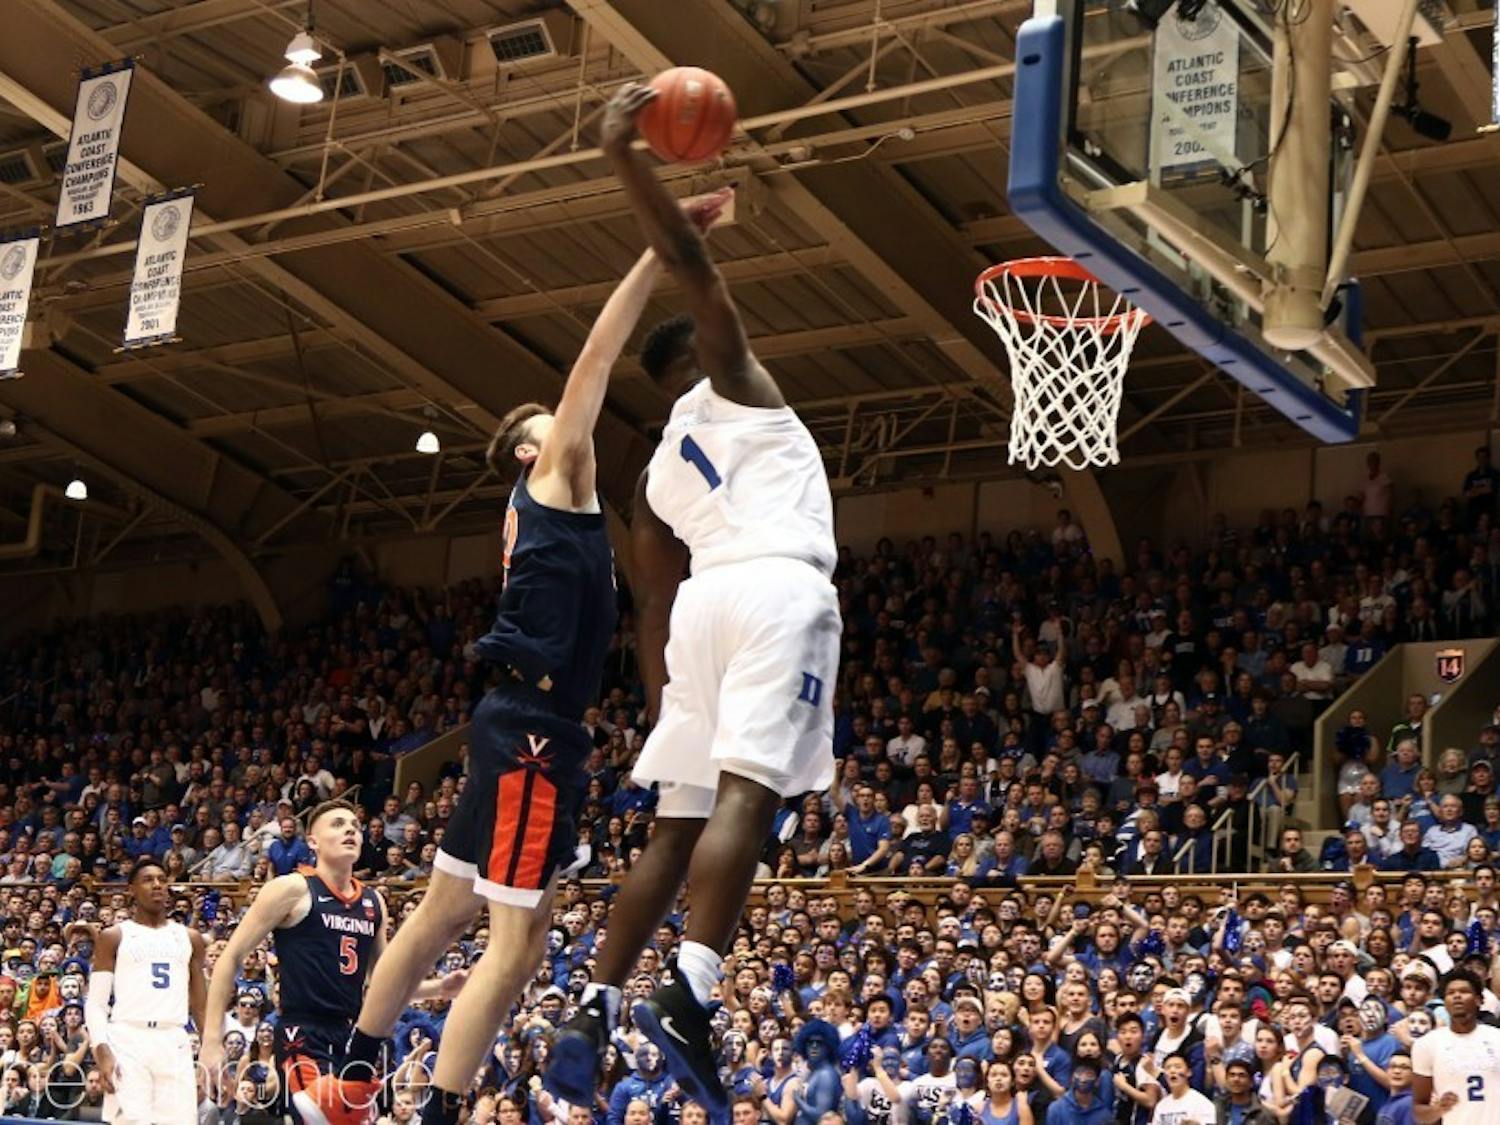 The rims in Cameron Indoor Stadium weren't the only ones subject to Zion Williamson's ferocious dunks